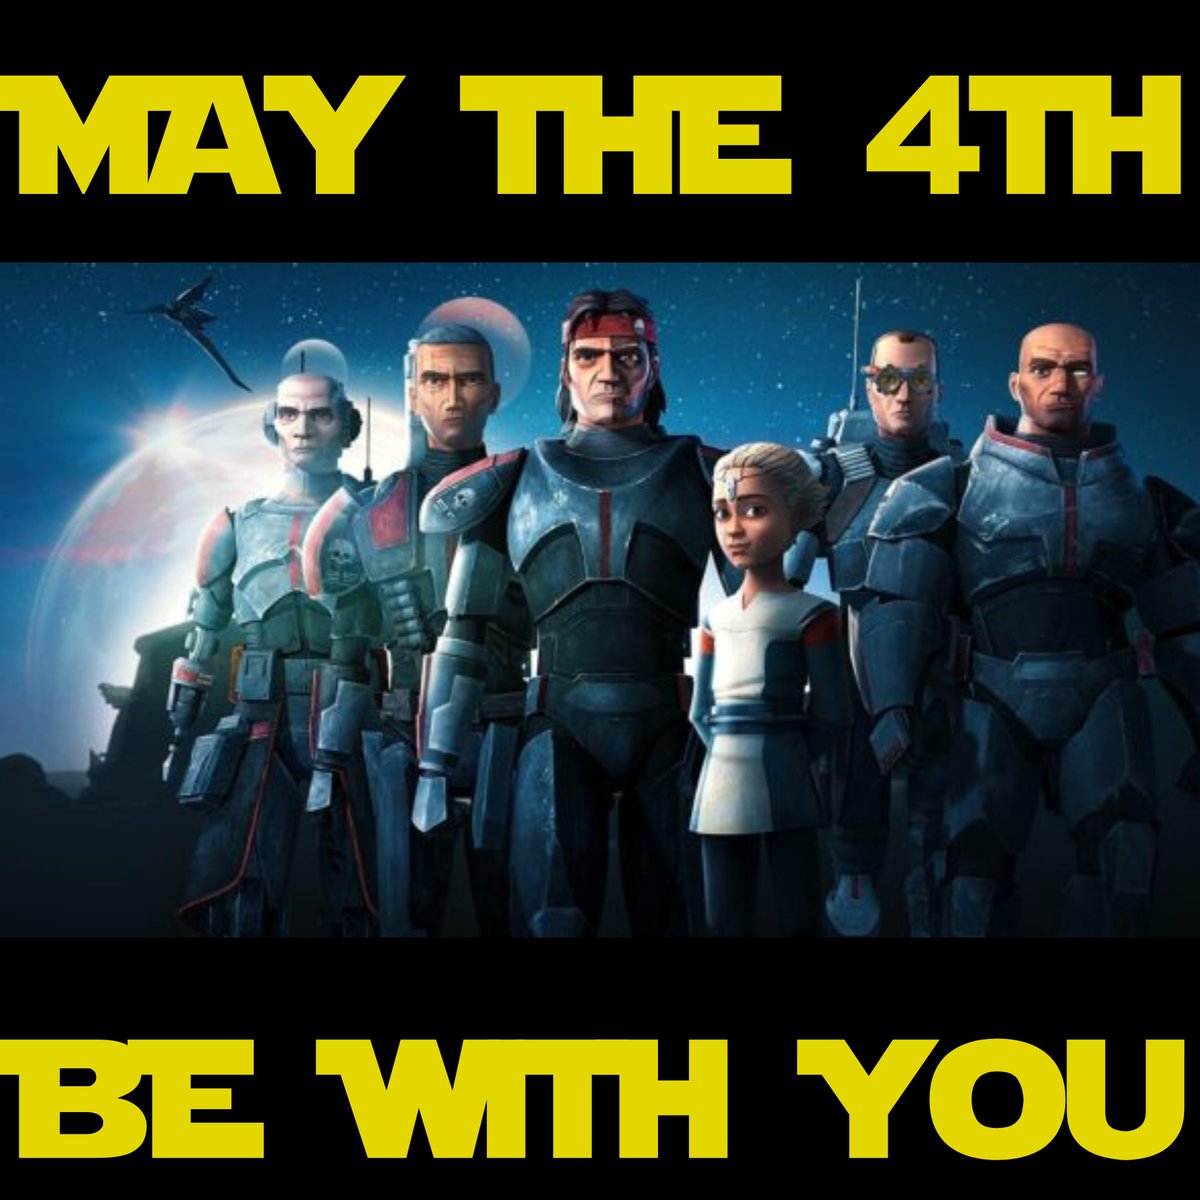 #MayThe4thBeWithYou!